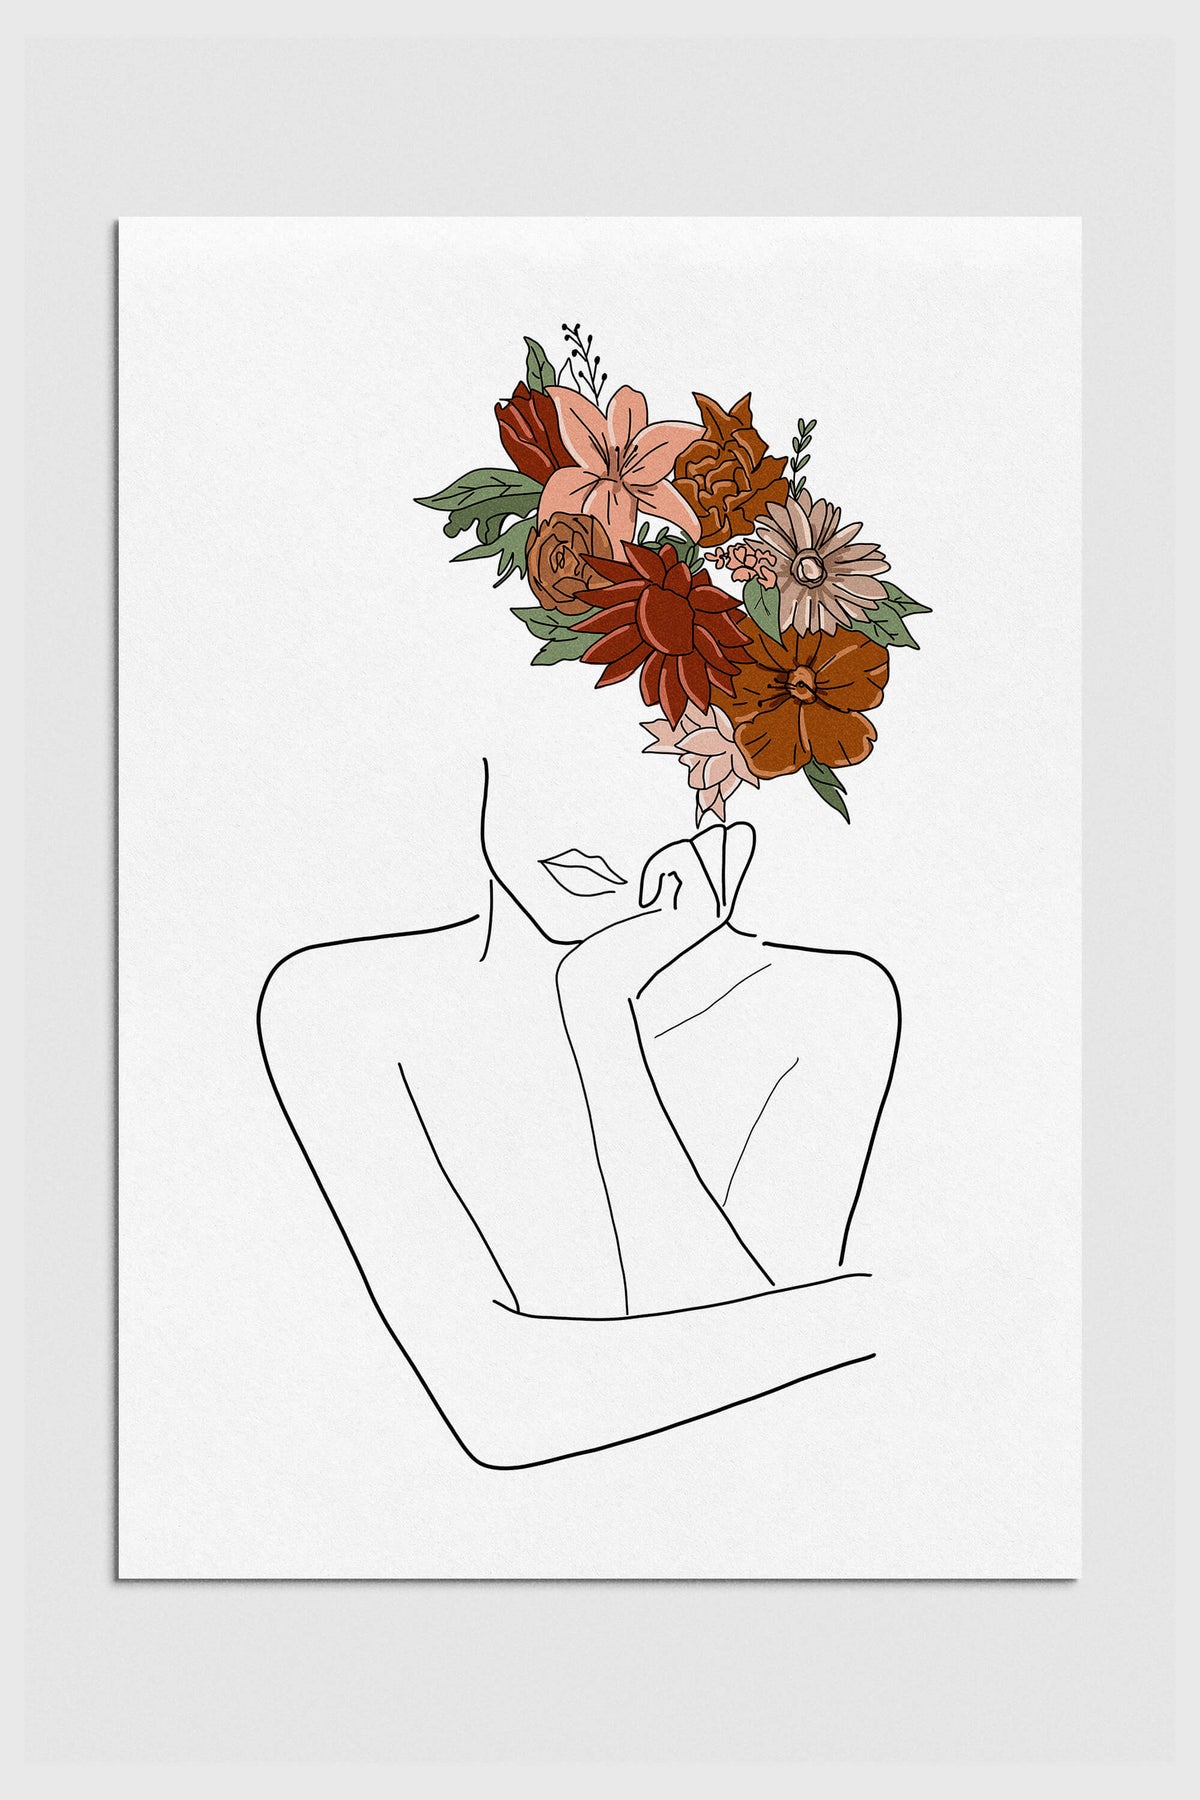 Line art of a thoughtful woman with a flower head, symbolizing a fusion of nature and introspection.